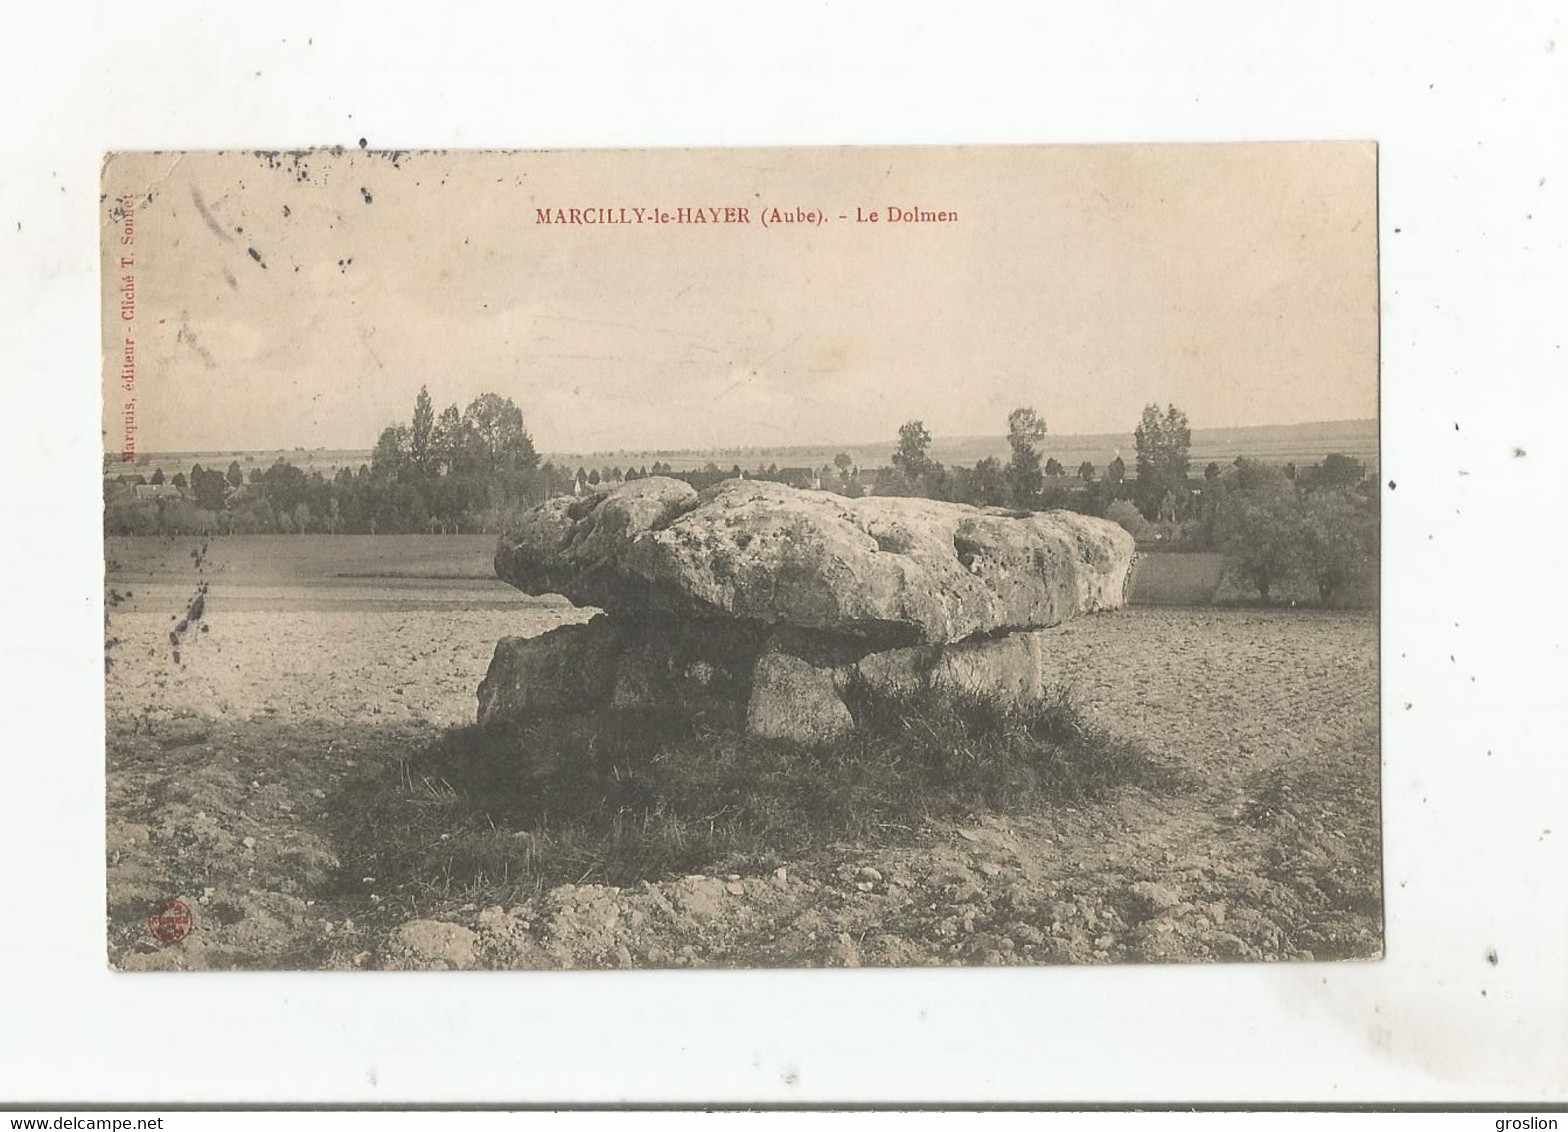 MARCILLY LE HAYER (AUBE) LE DOLMEN 1906 - Marcilly